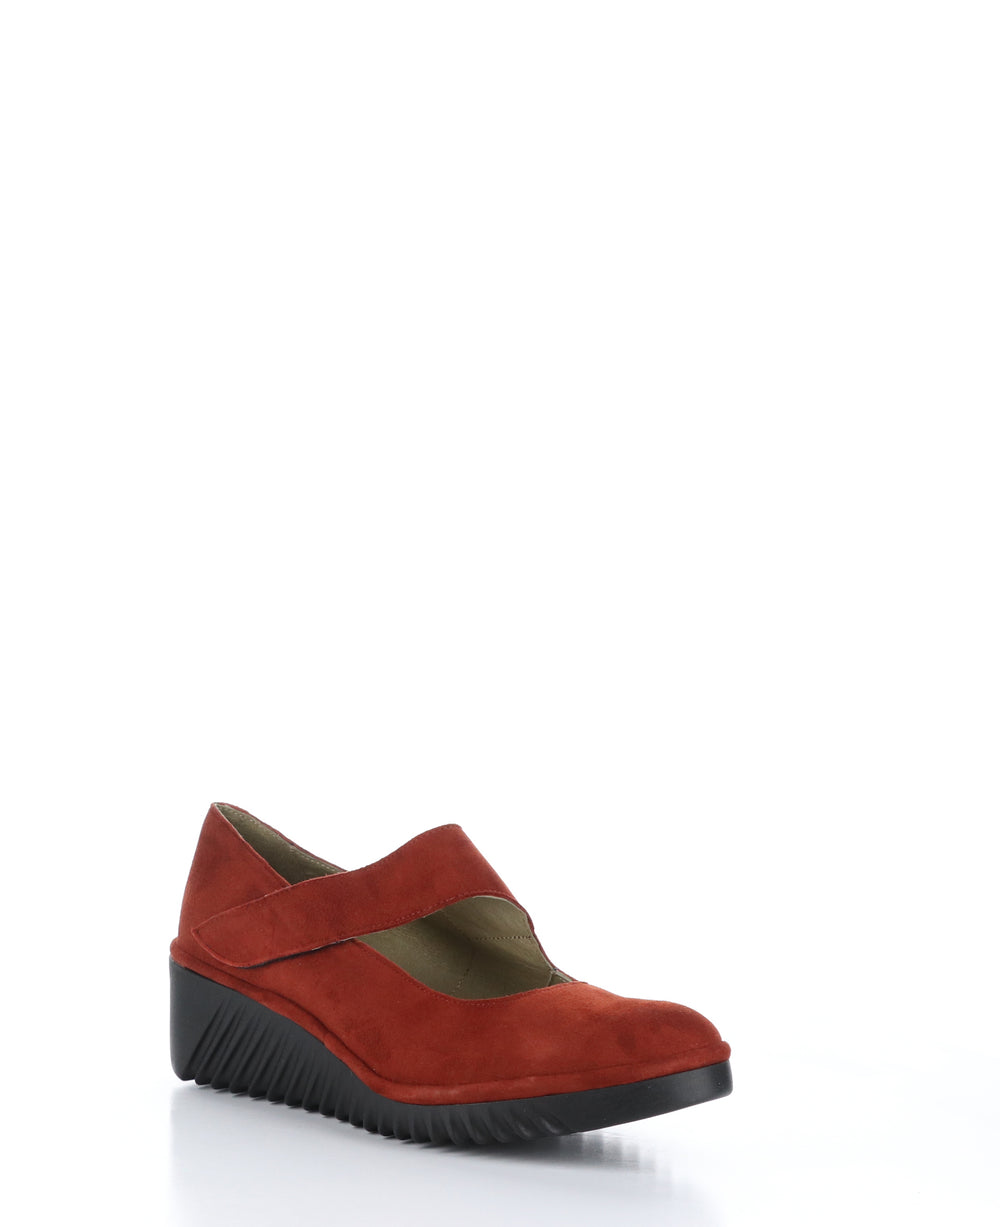 LYKA350FLY Red Round Toe Shoes